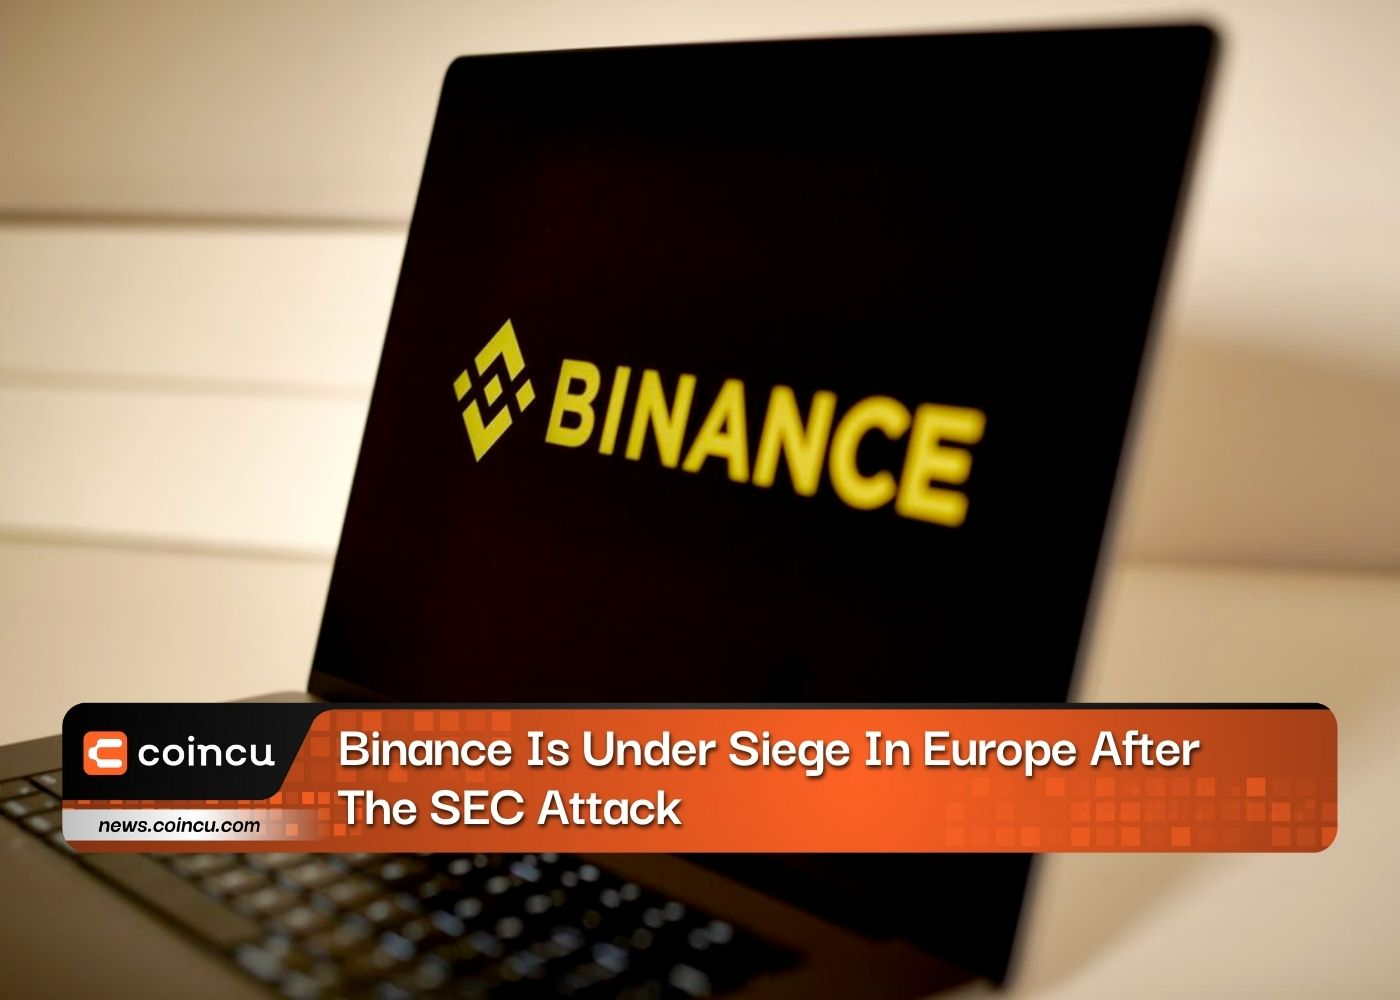 Binance Is Under Siege In Europe After The SEC Attack